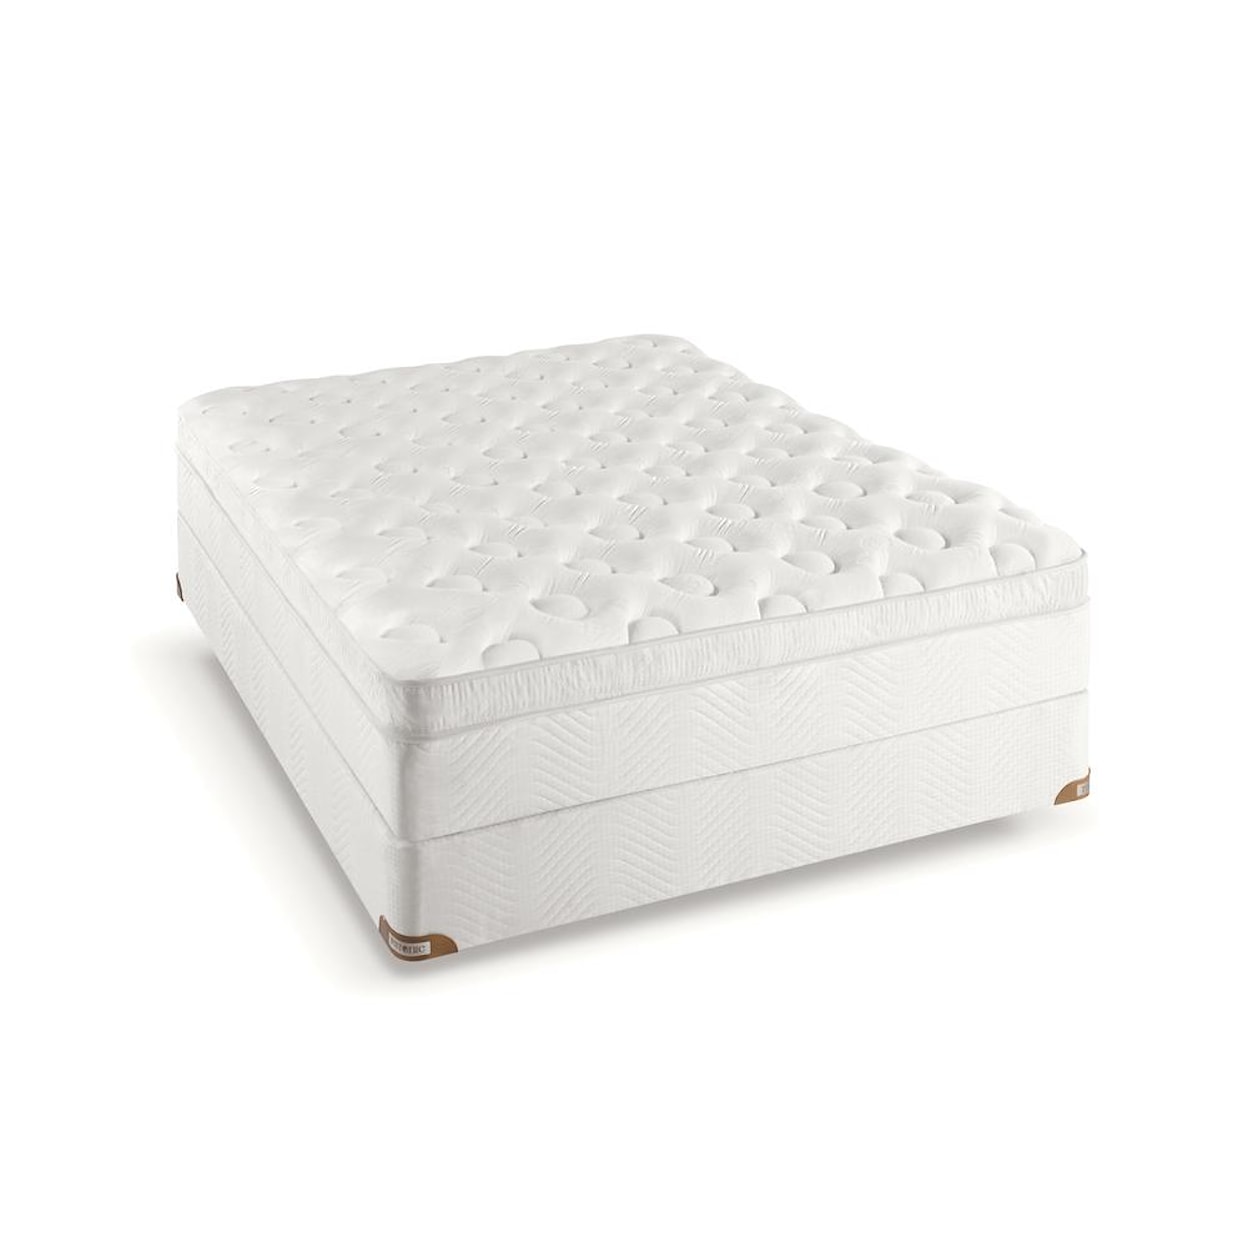 Upper Midwest Bedding- Restonic Comfort Care Beacon Hill Euro Top